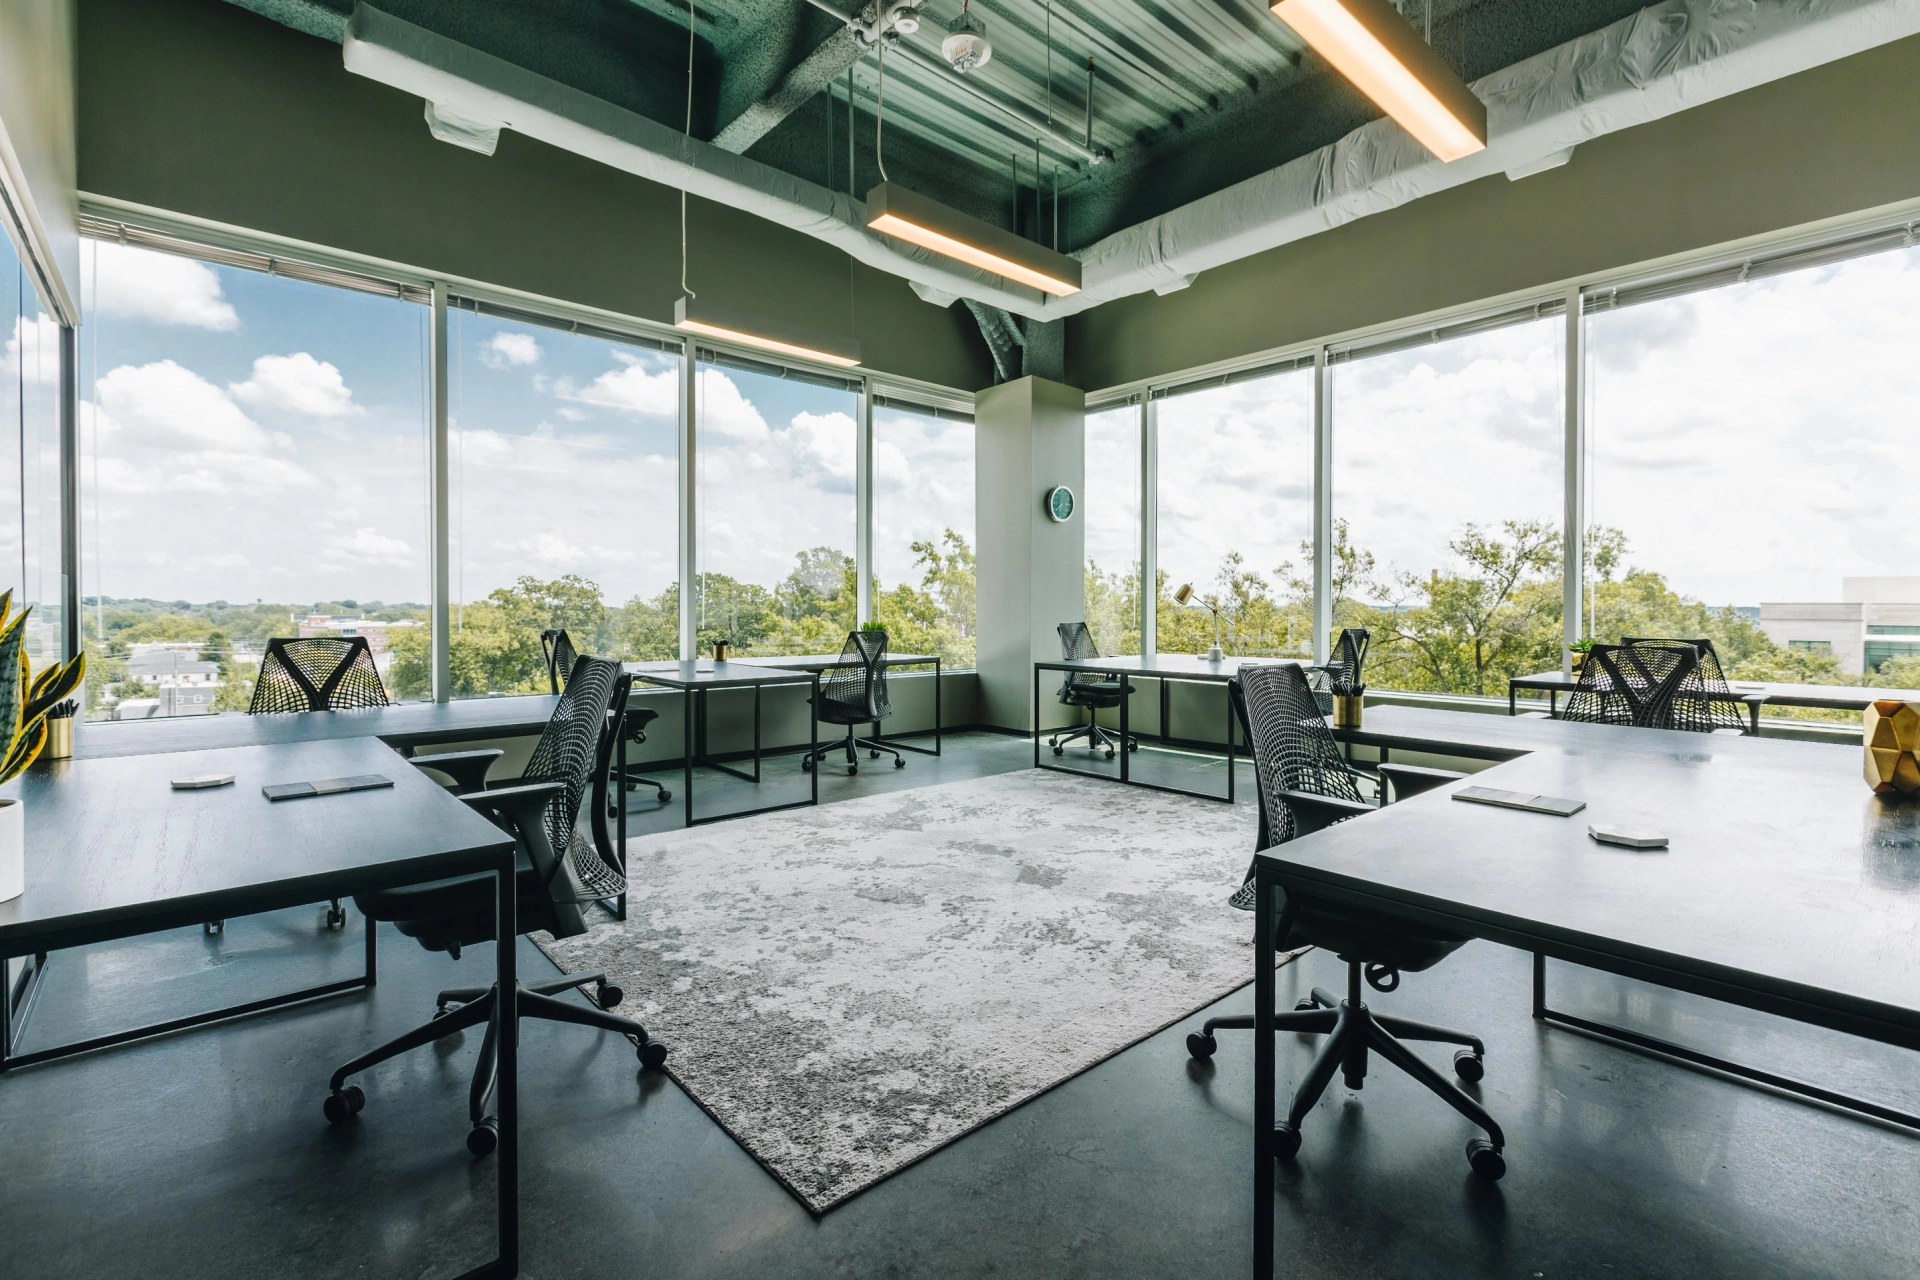 An open coworking space with large windows overlooking a city.